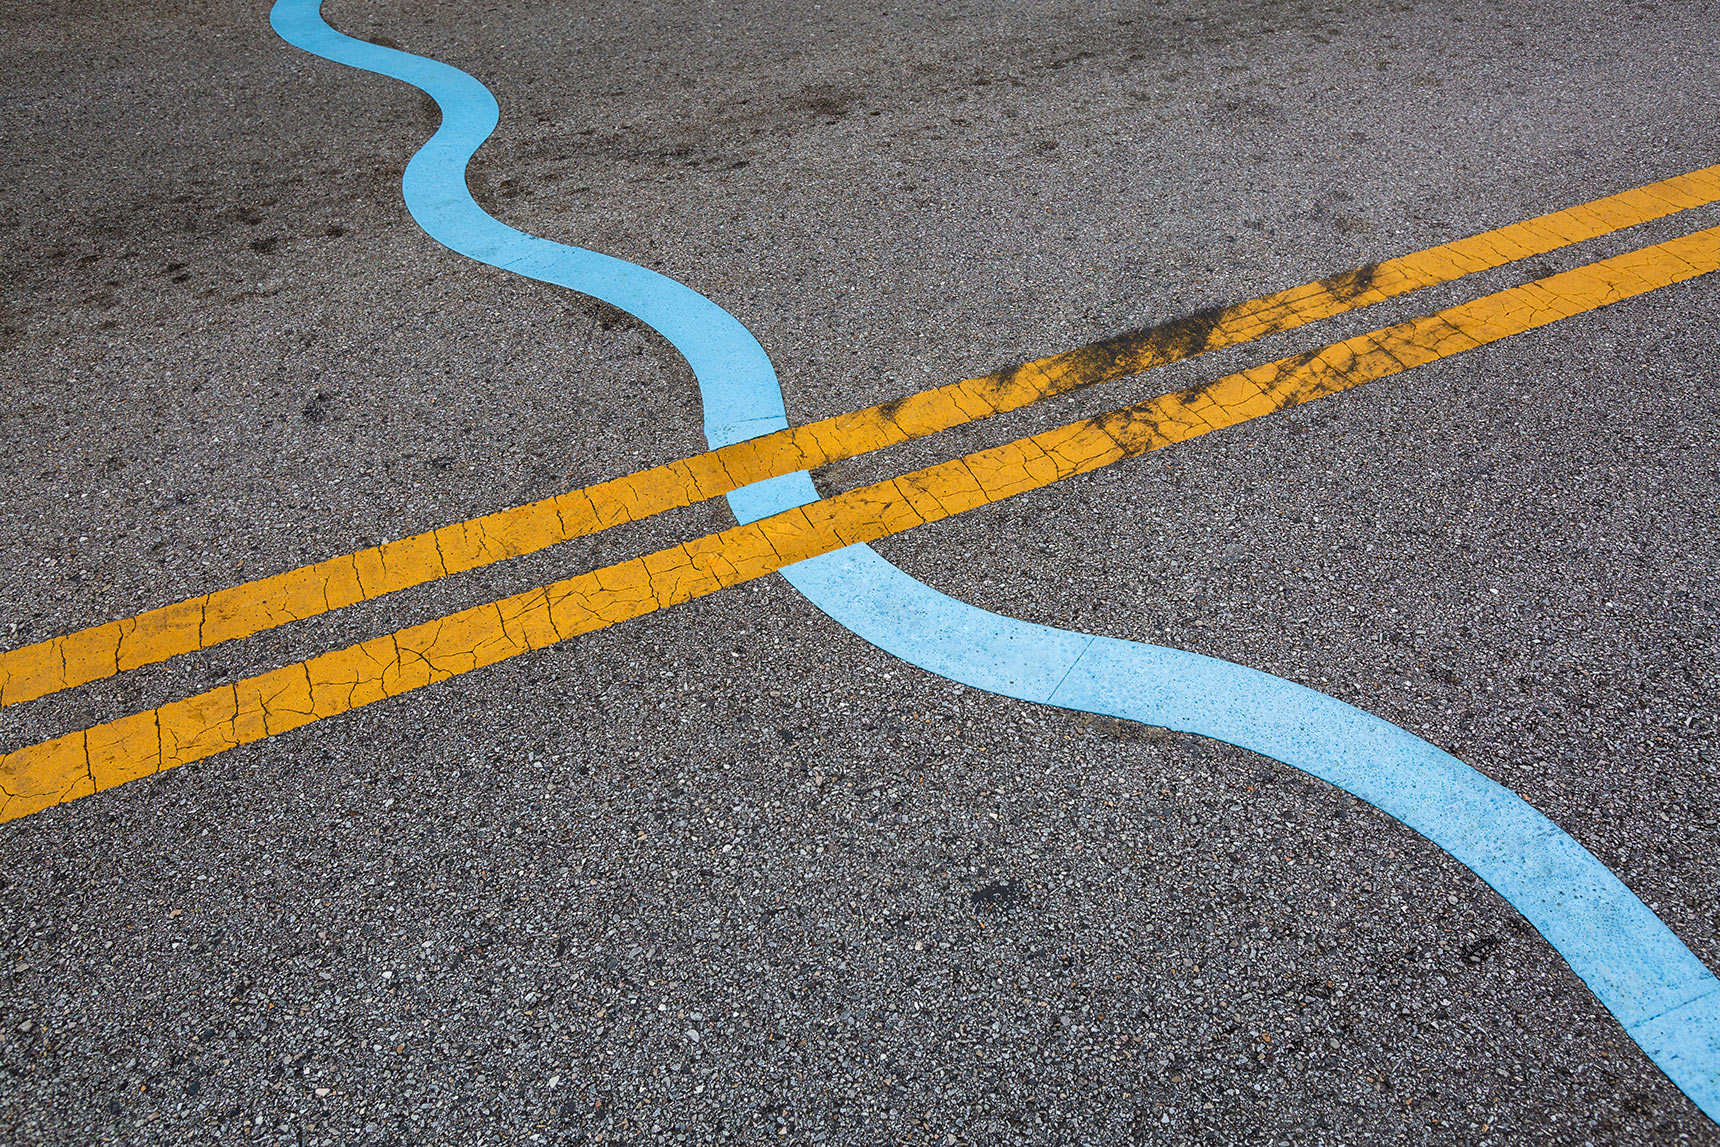 Detail photo of a bright blue six-inch wide wavy line on the street, intersecting with yellow road-marking lines.